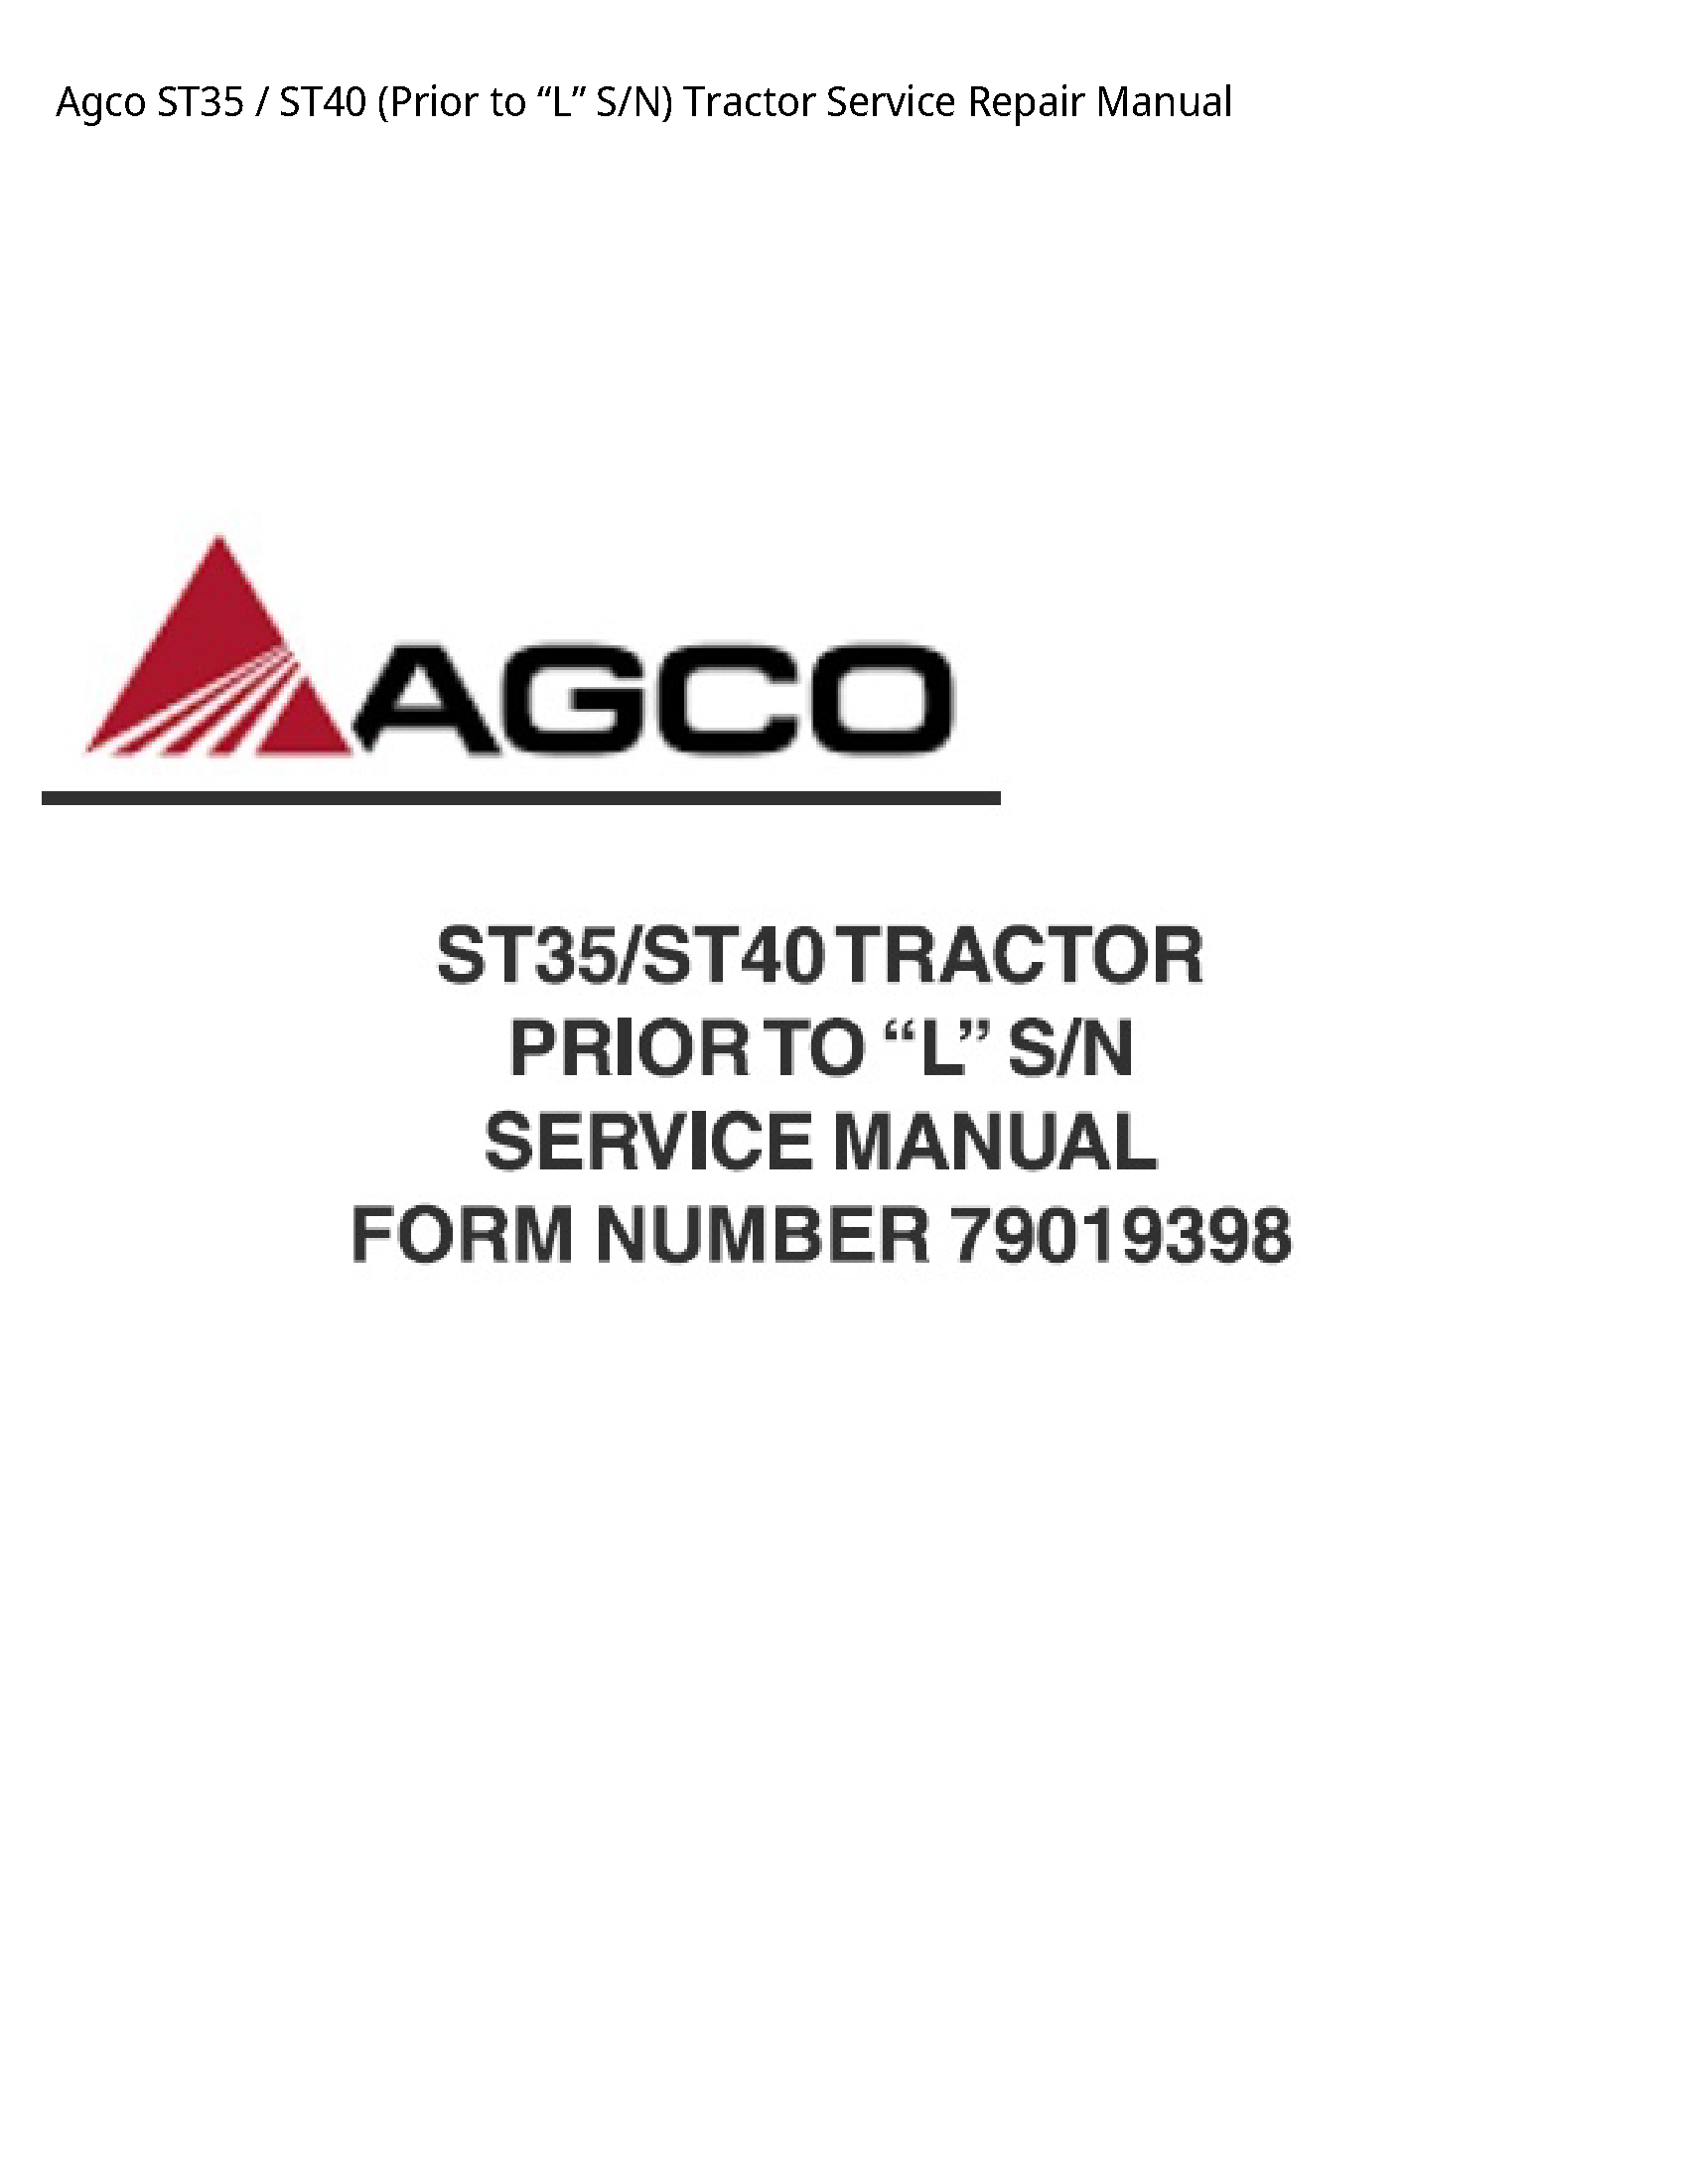 AGCO ST35 (Prior to “L” S/N) Tractor manual